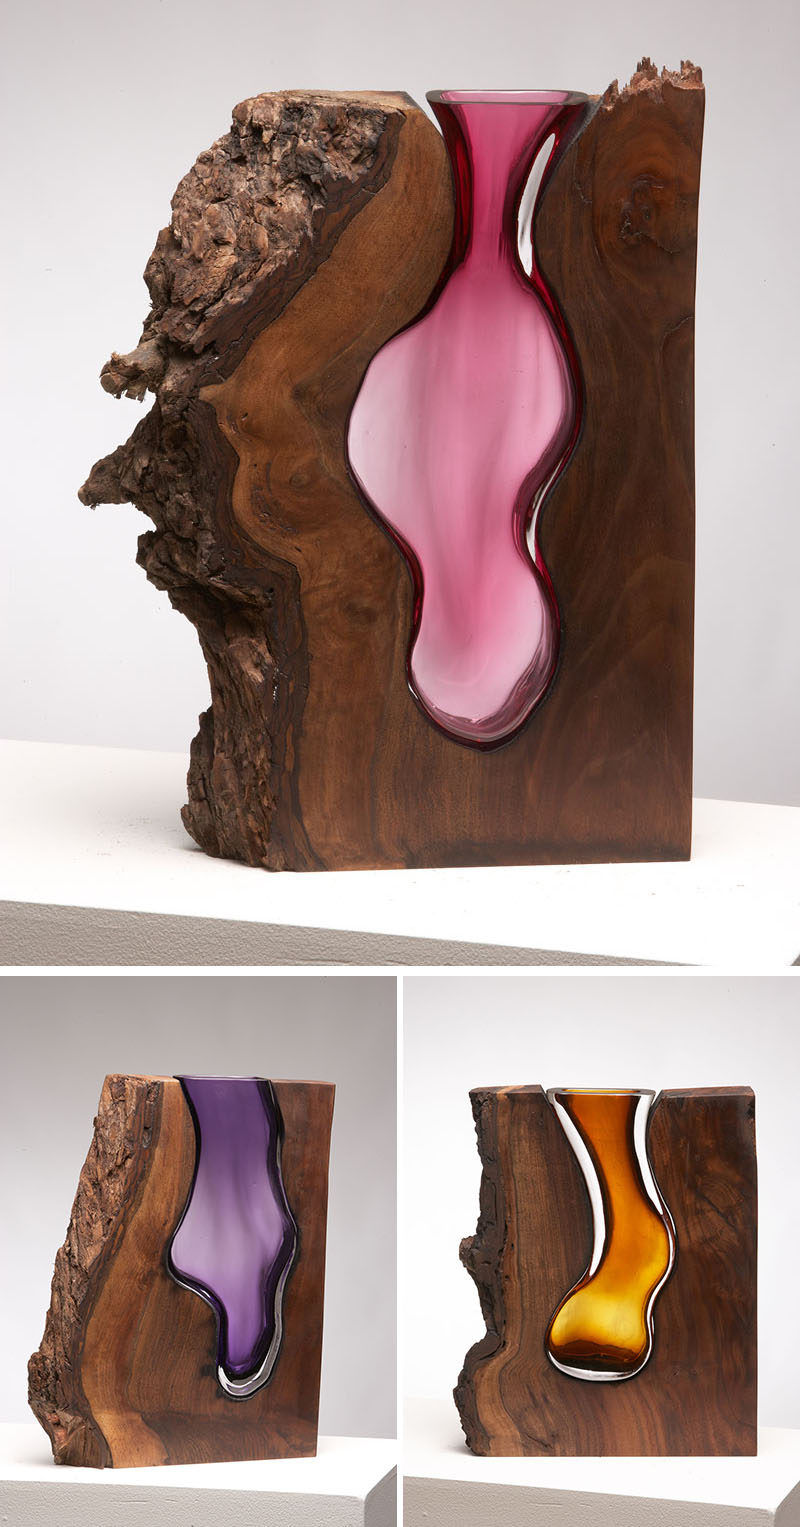 Molten Glass Is Hand Blown Into These Wood Pieces To Make Contemporary ...